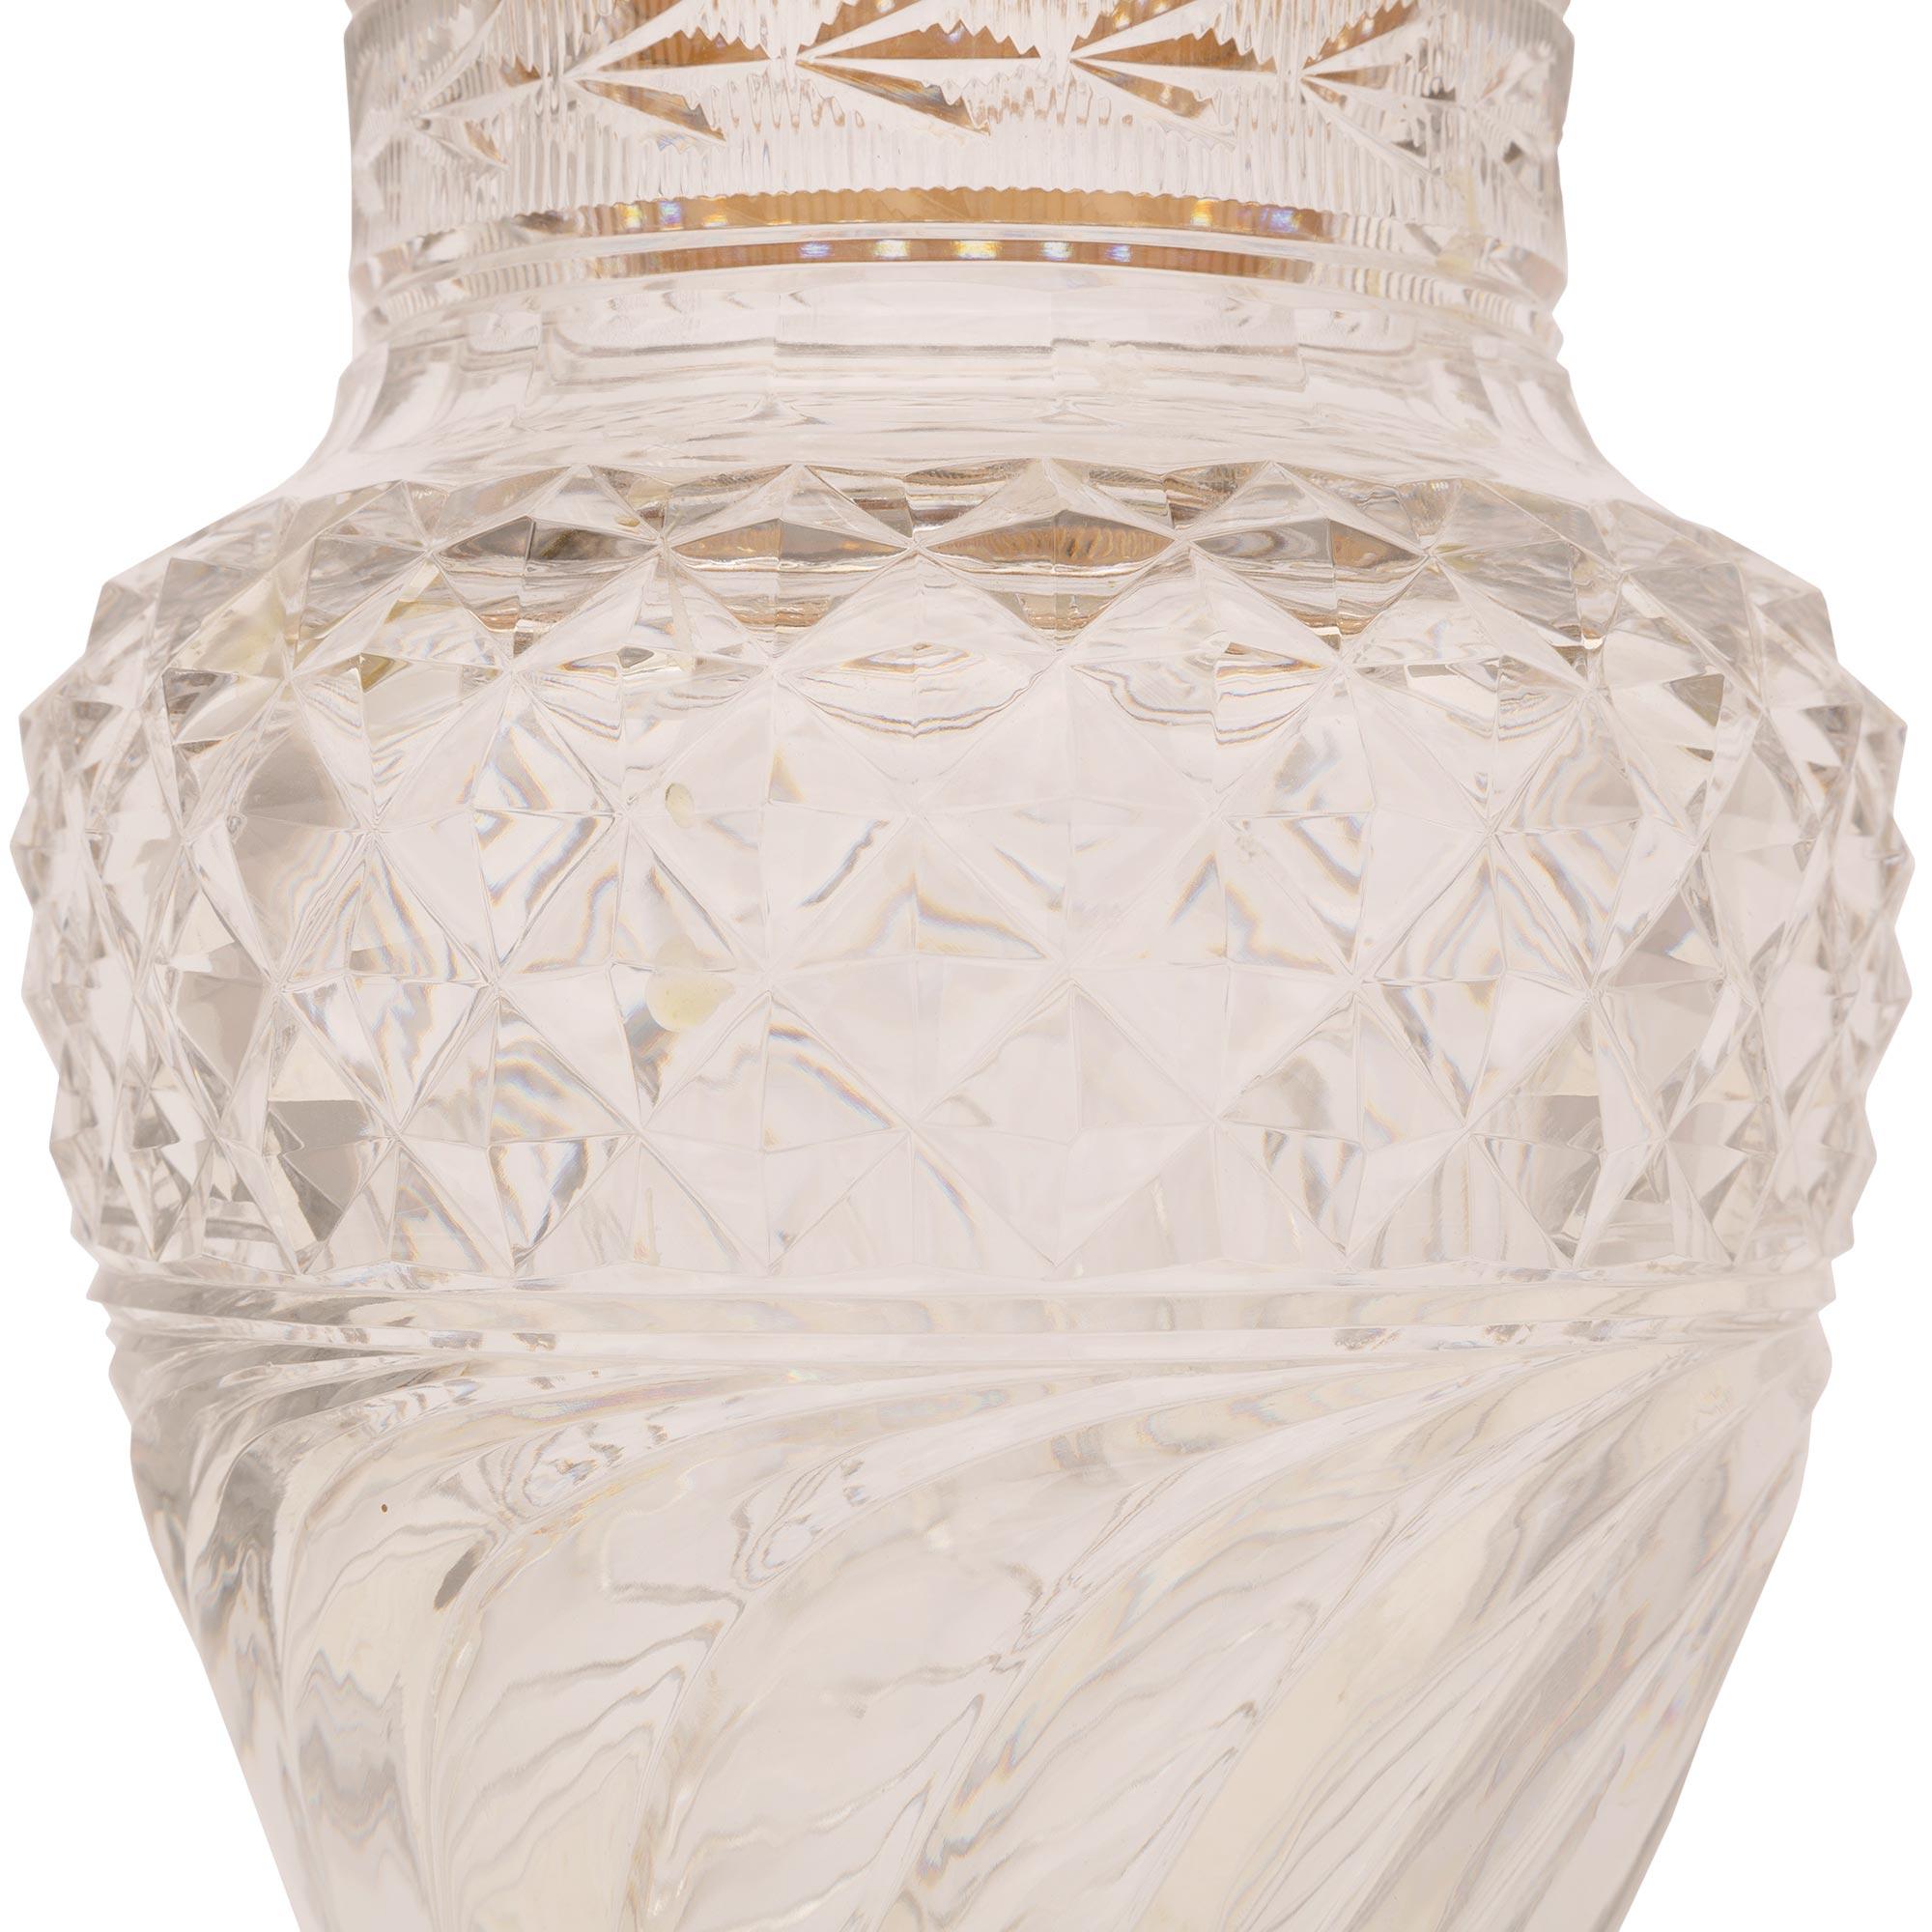 French 19th Century Louis XVI St. Baccarat Crystal and Ormolu Potpourri Vase For Sale 3